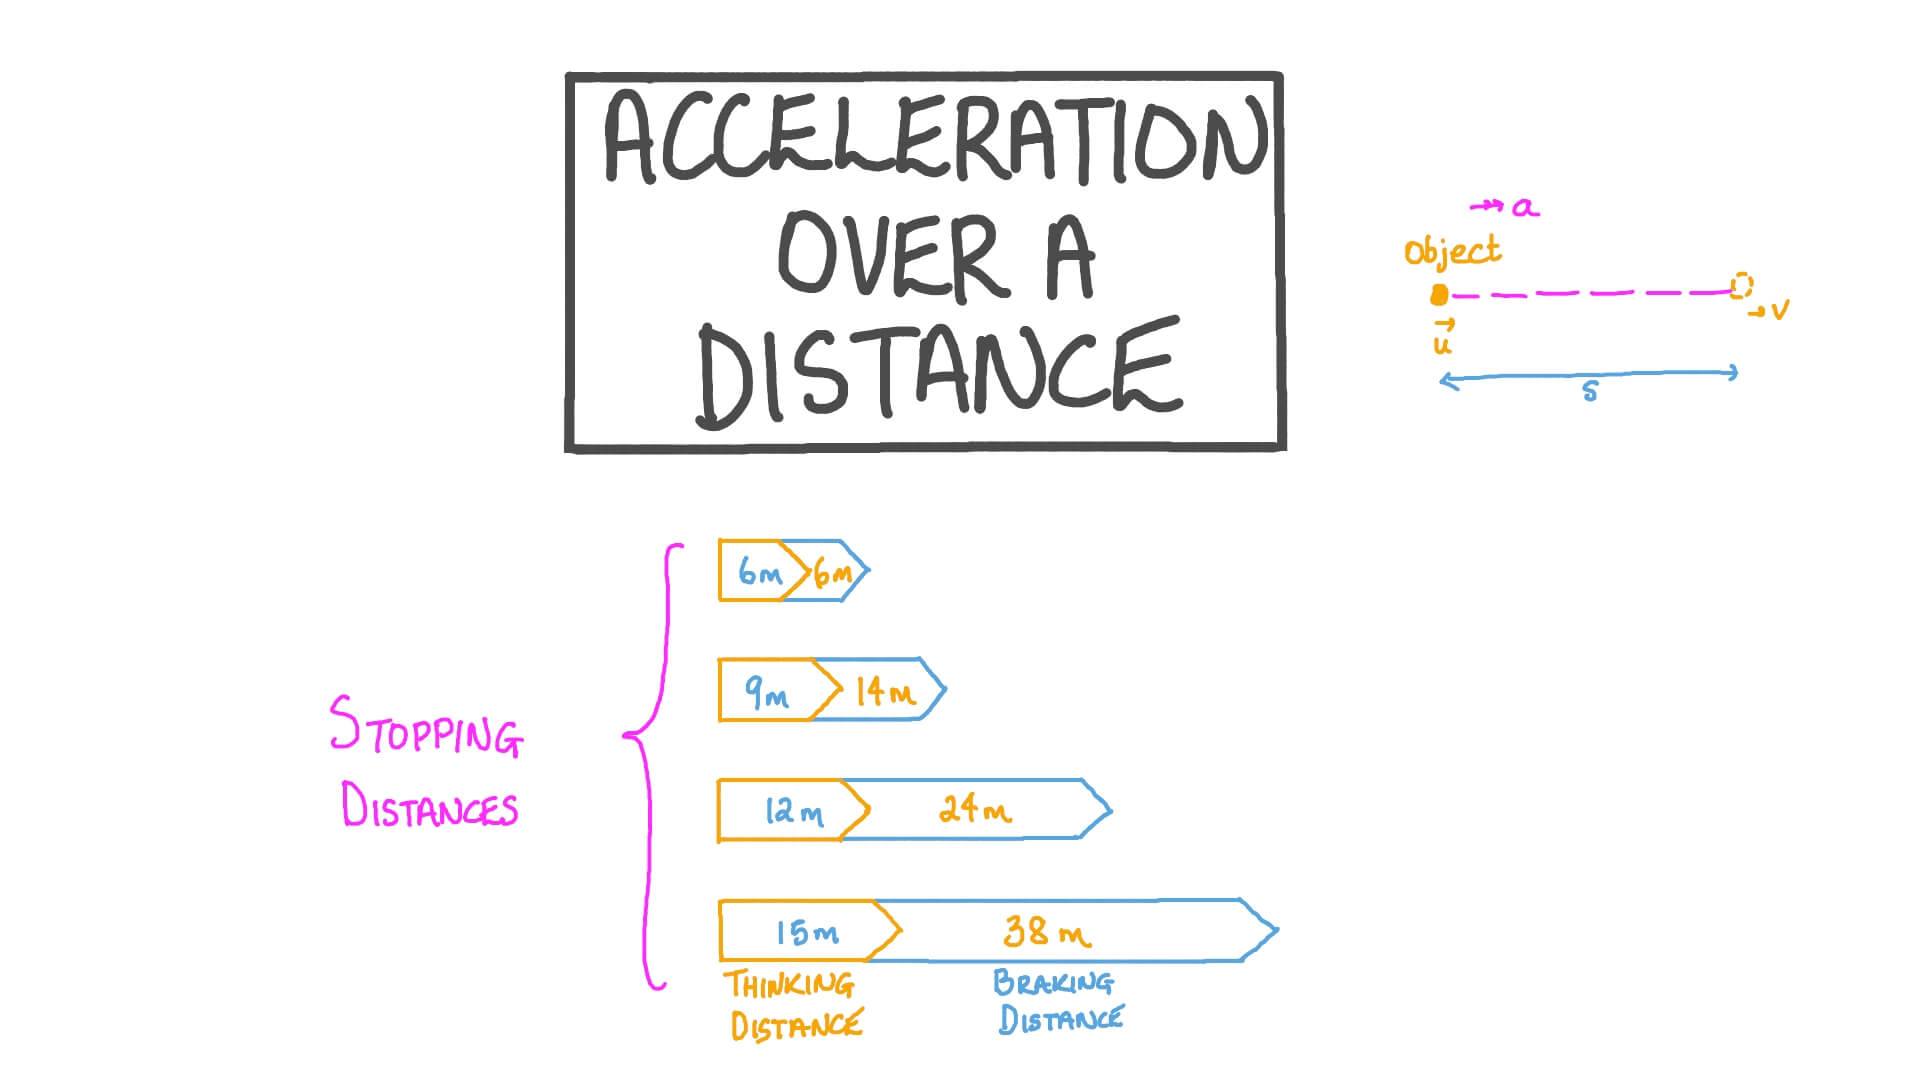 Lesson Video: Acceleration over a Distance